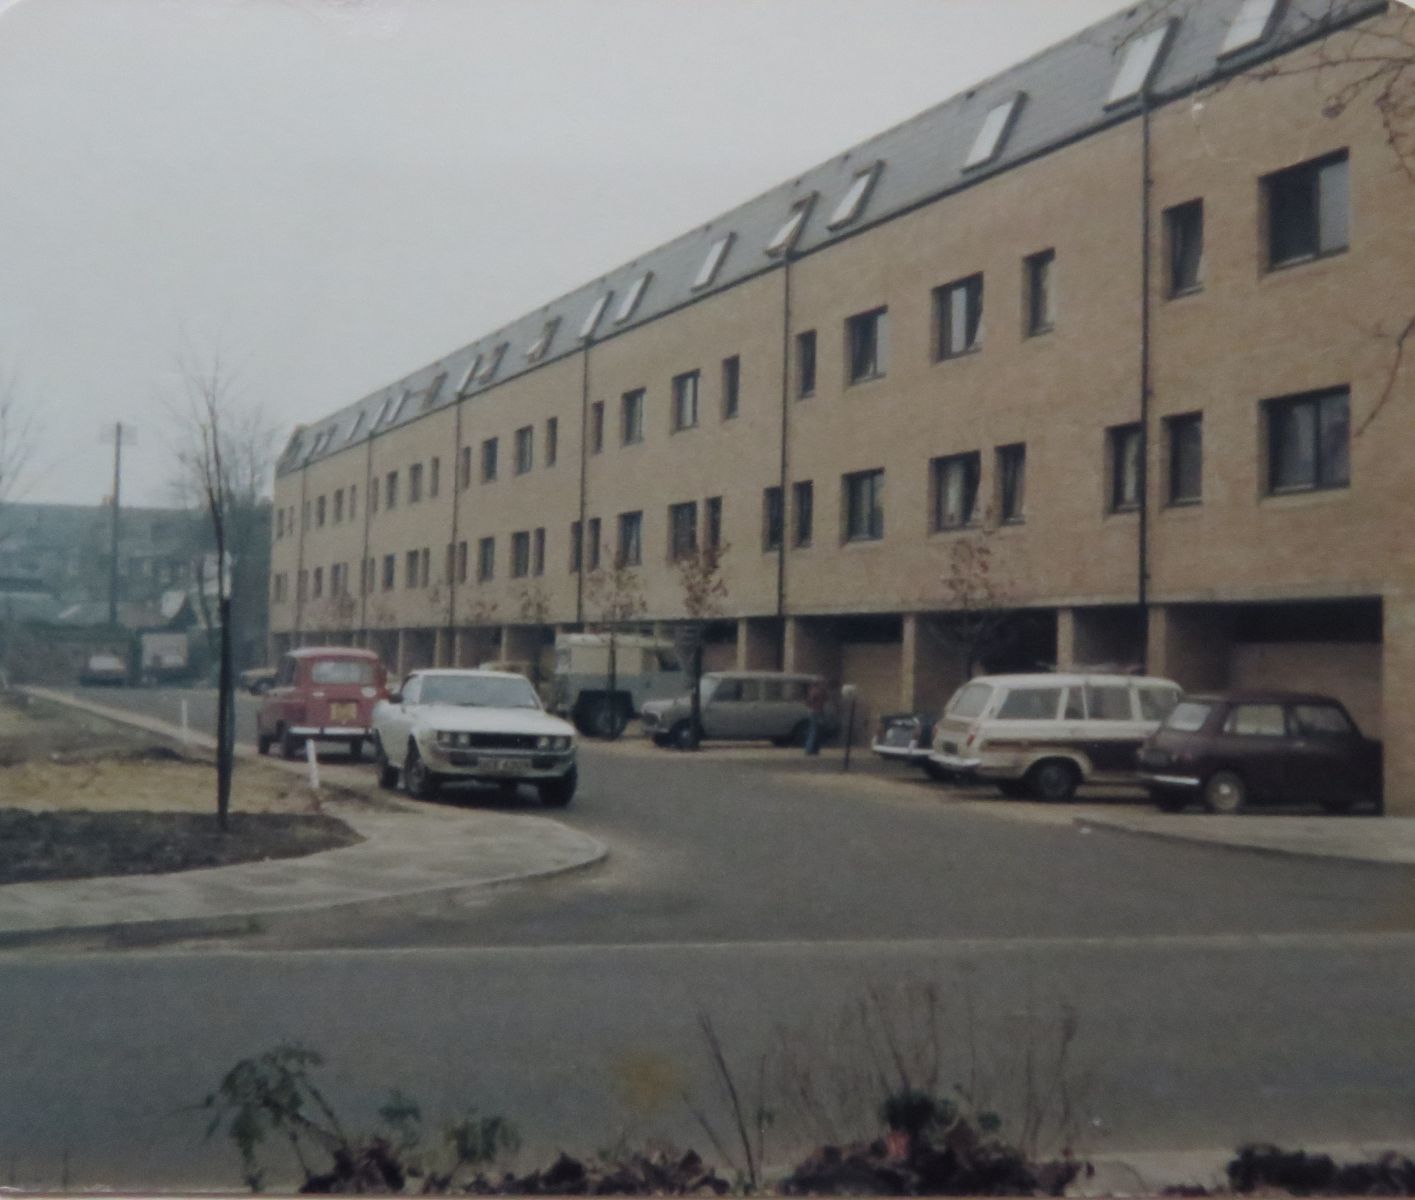 Photograph of the completed building at Manor Place taken by Denis Griffiths (Head Porter). (Archive ref: JCAD-3-CAM-KING-14-5-1978)